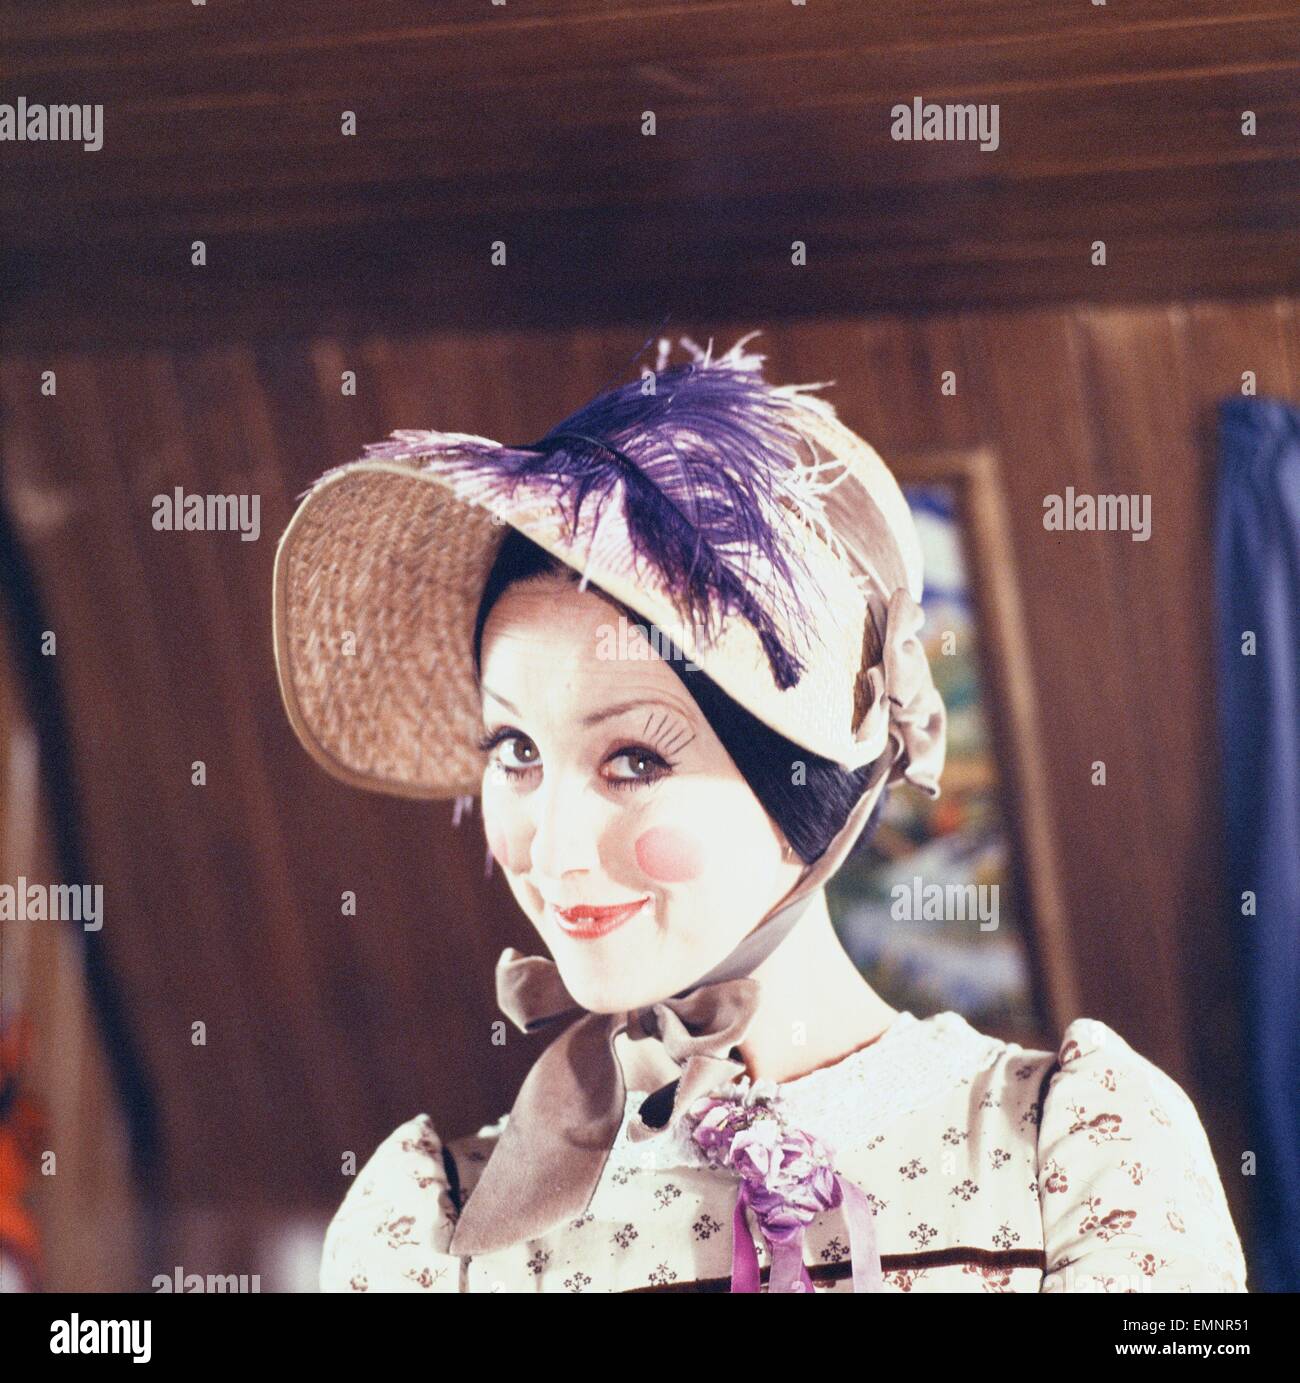 Actress Una Stubb as Aunt Sally in the Southern Television series of Worzel Gummidge. Aunt Sally was a life-size fairground doll and Worzel's femme fatale. 21st October 1980 Stock Photo